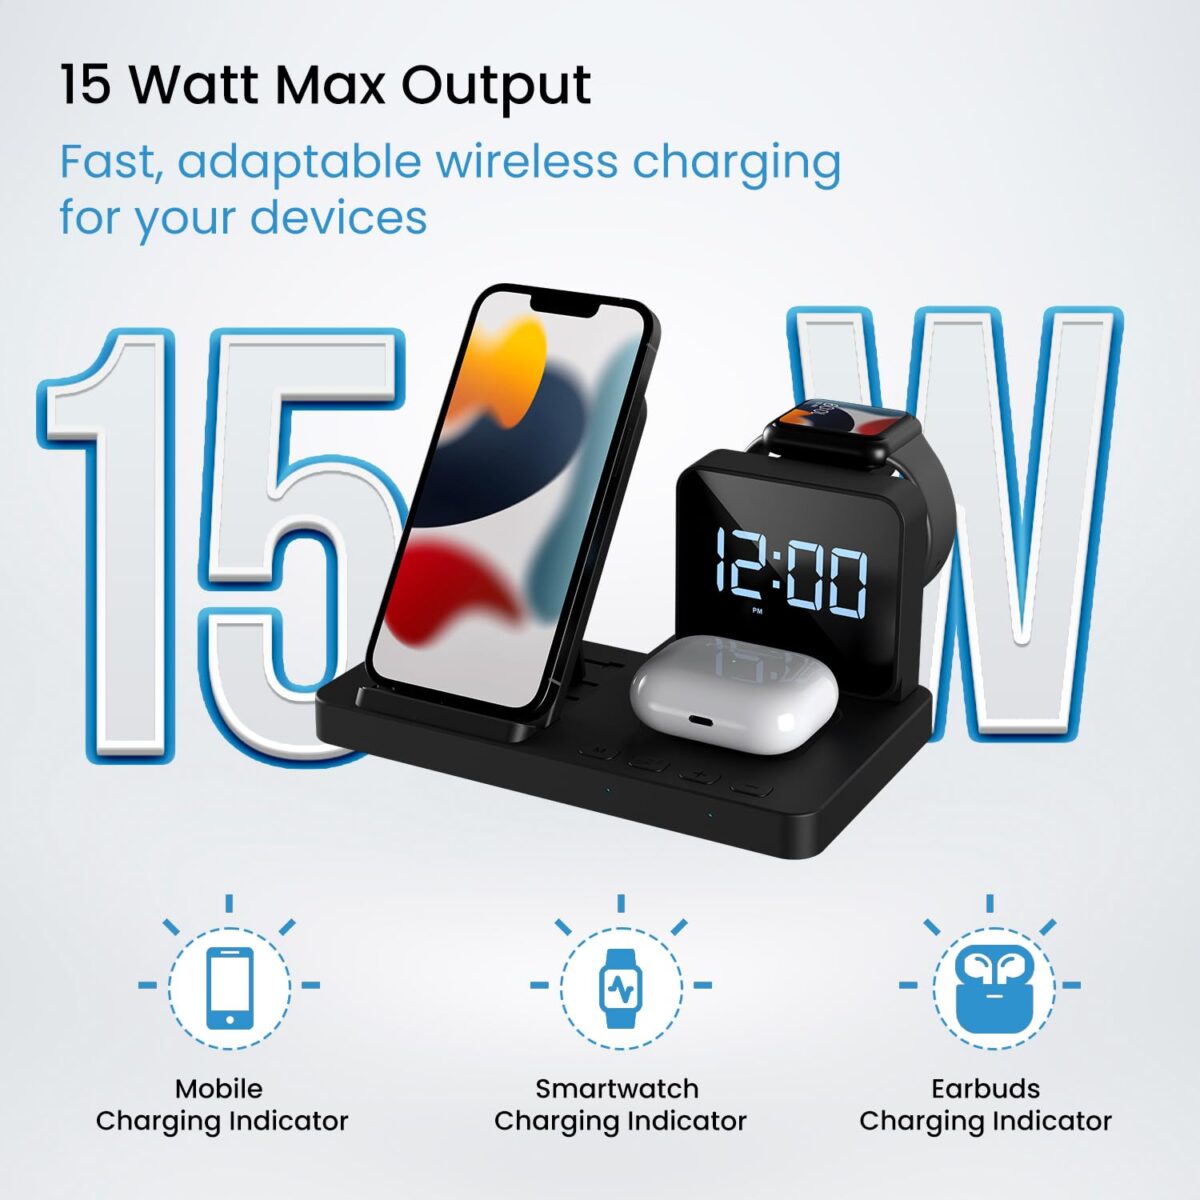 Portronics bella 15 w 3 in 1 wireless charger for iphone 8 portronics bella 15 w 3 in 1 wireless charger for iphone